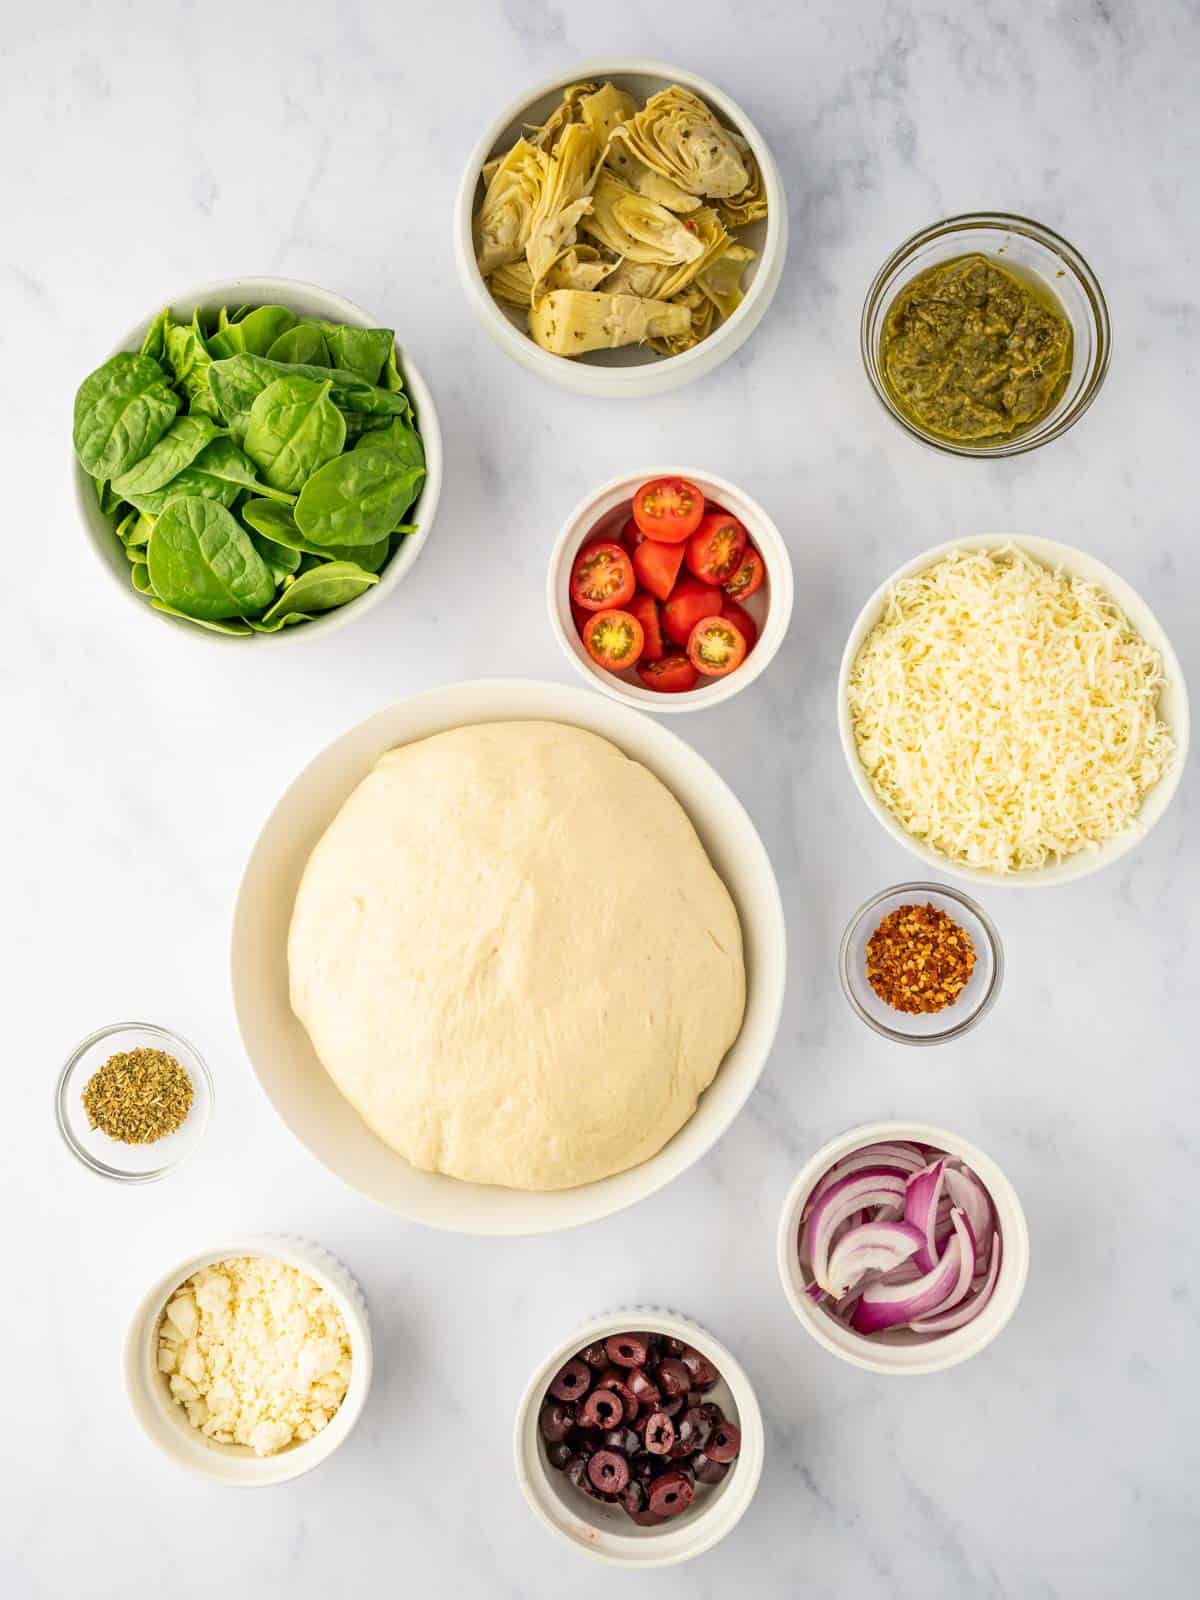 Ingredients needed for homemade pizza